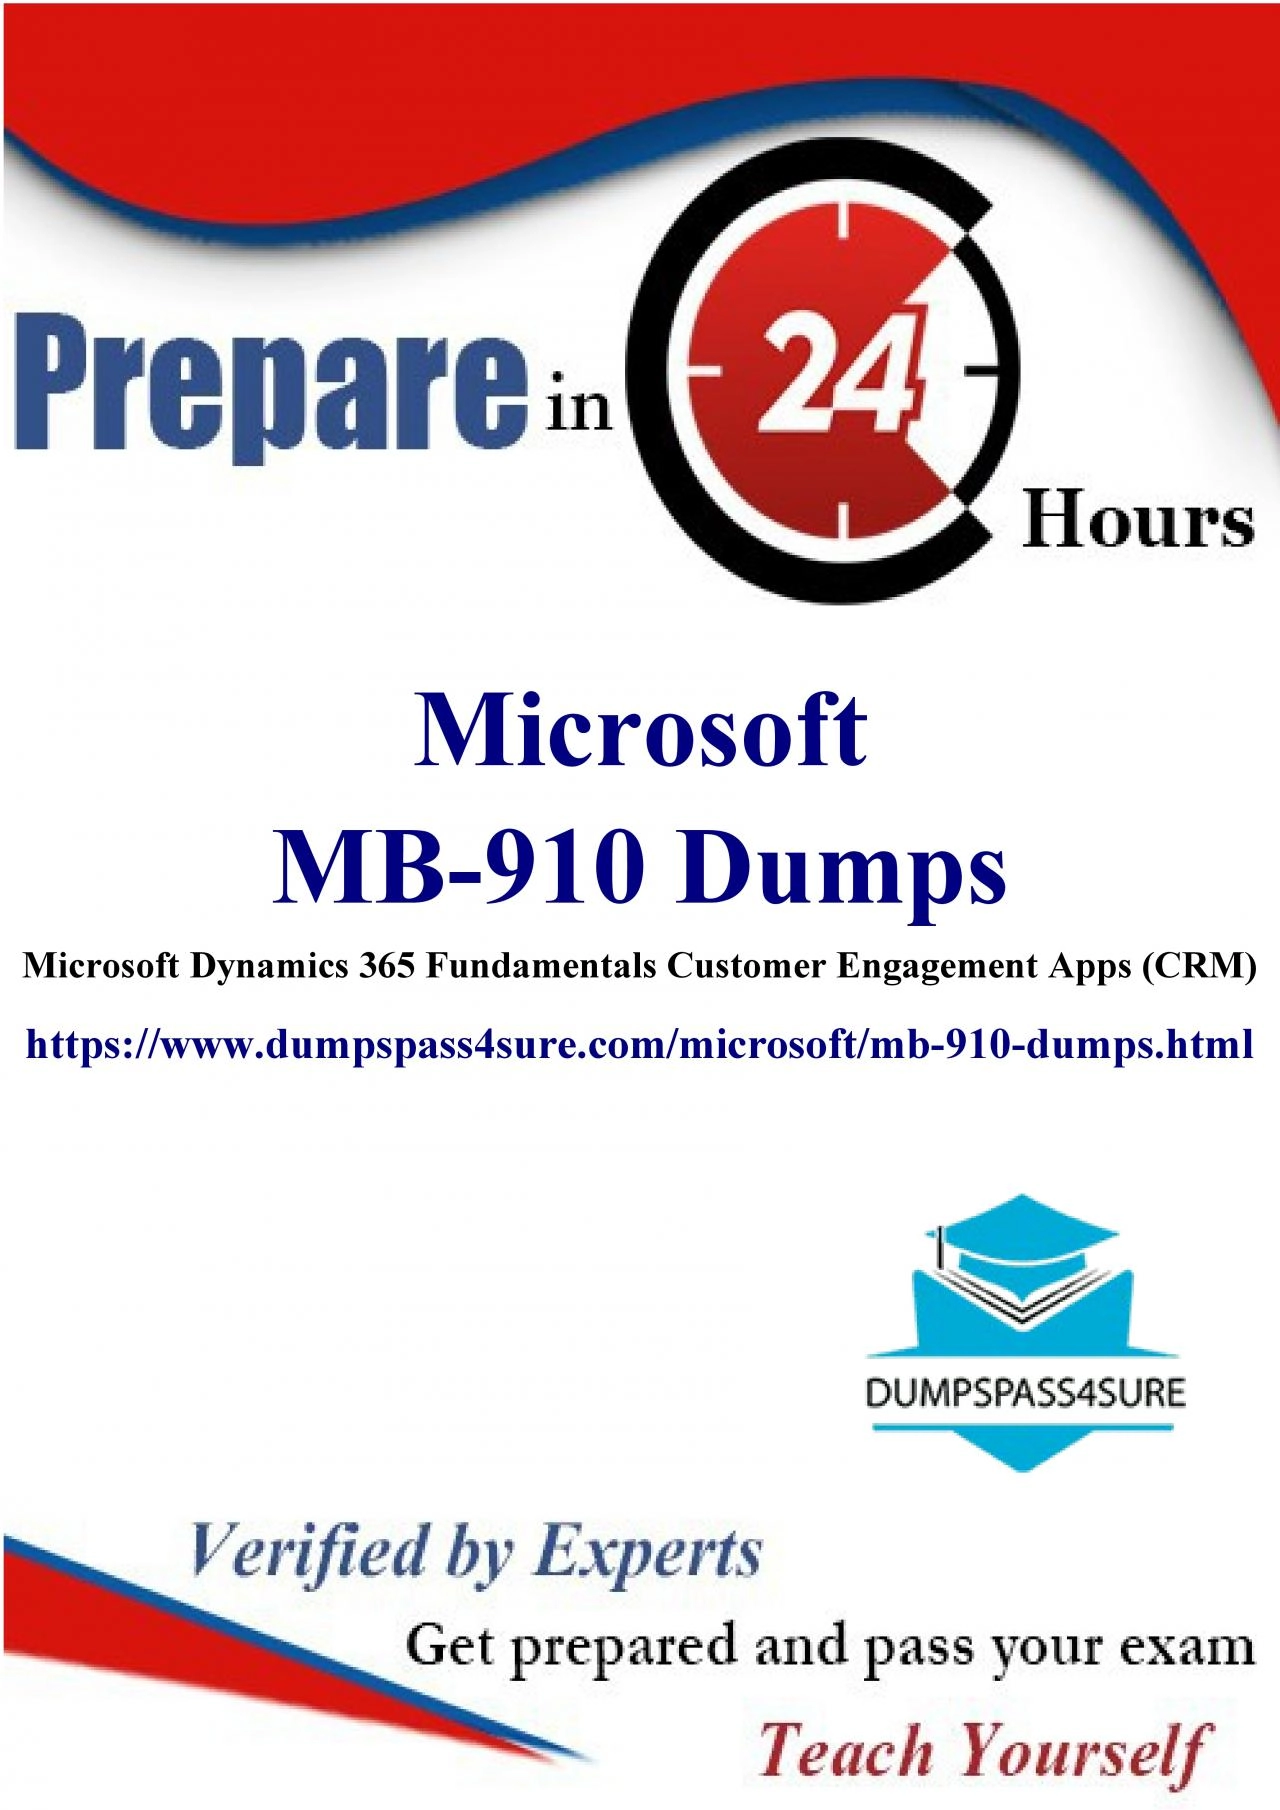 What are the latest updates in the MB-910 Exam Questions? Unlock 20% Off at DumpsPass4Sure!